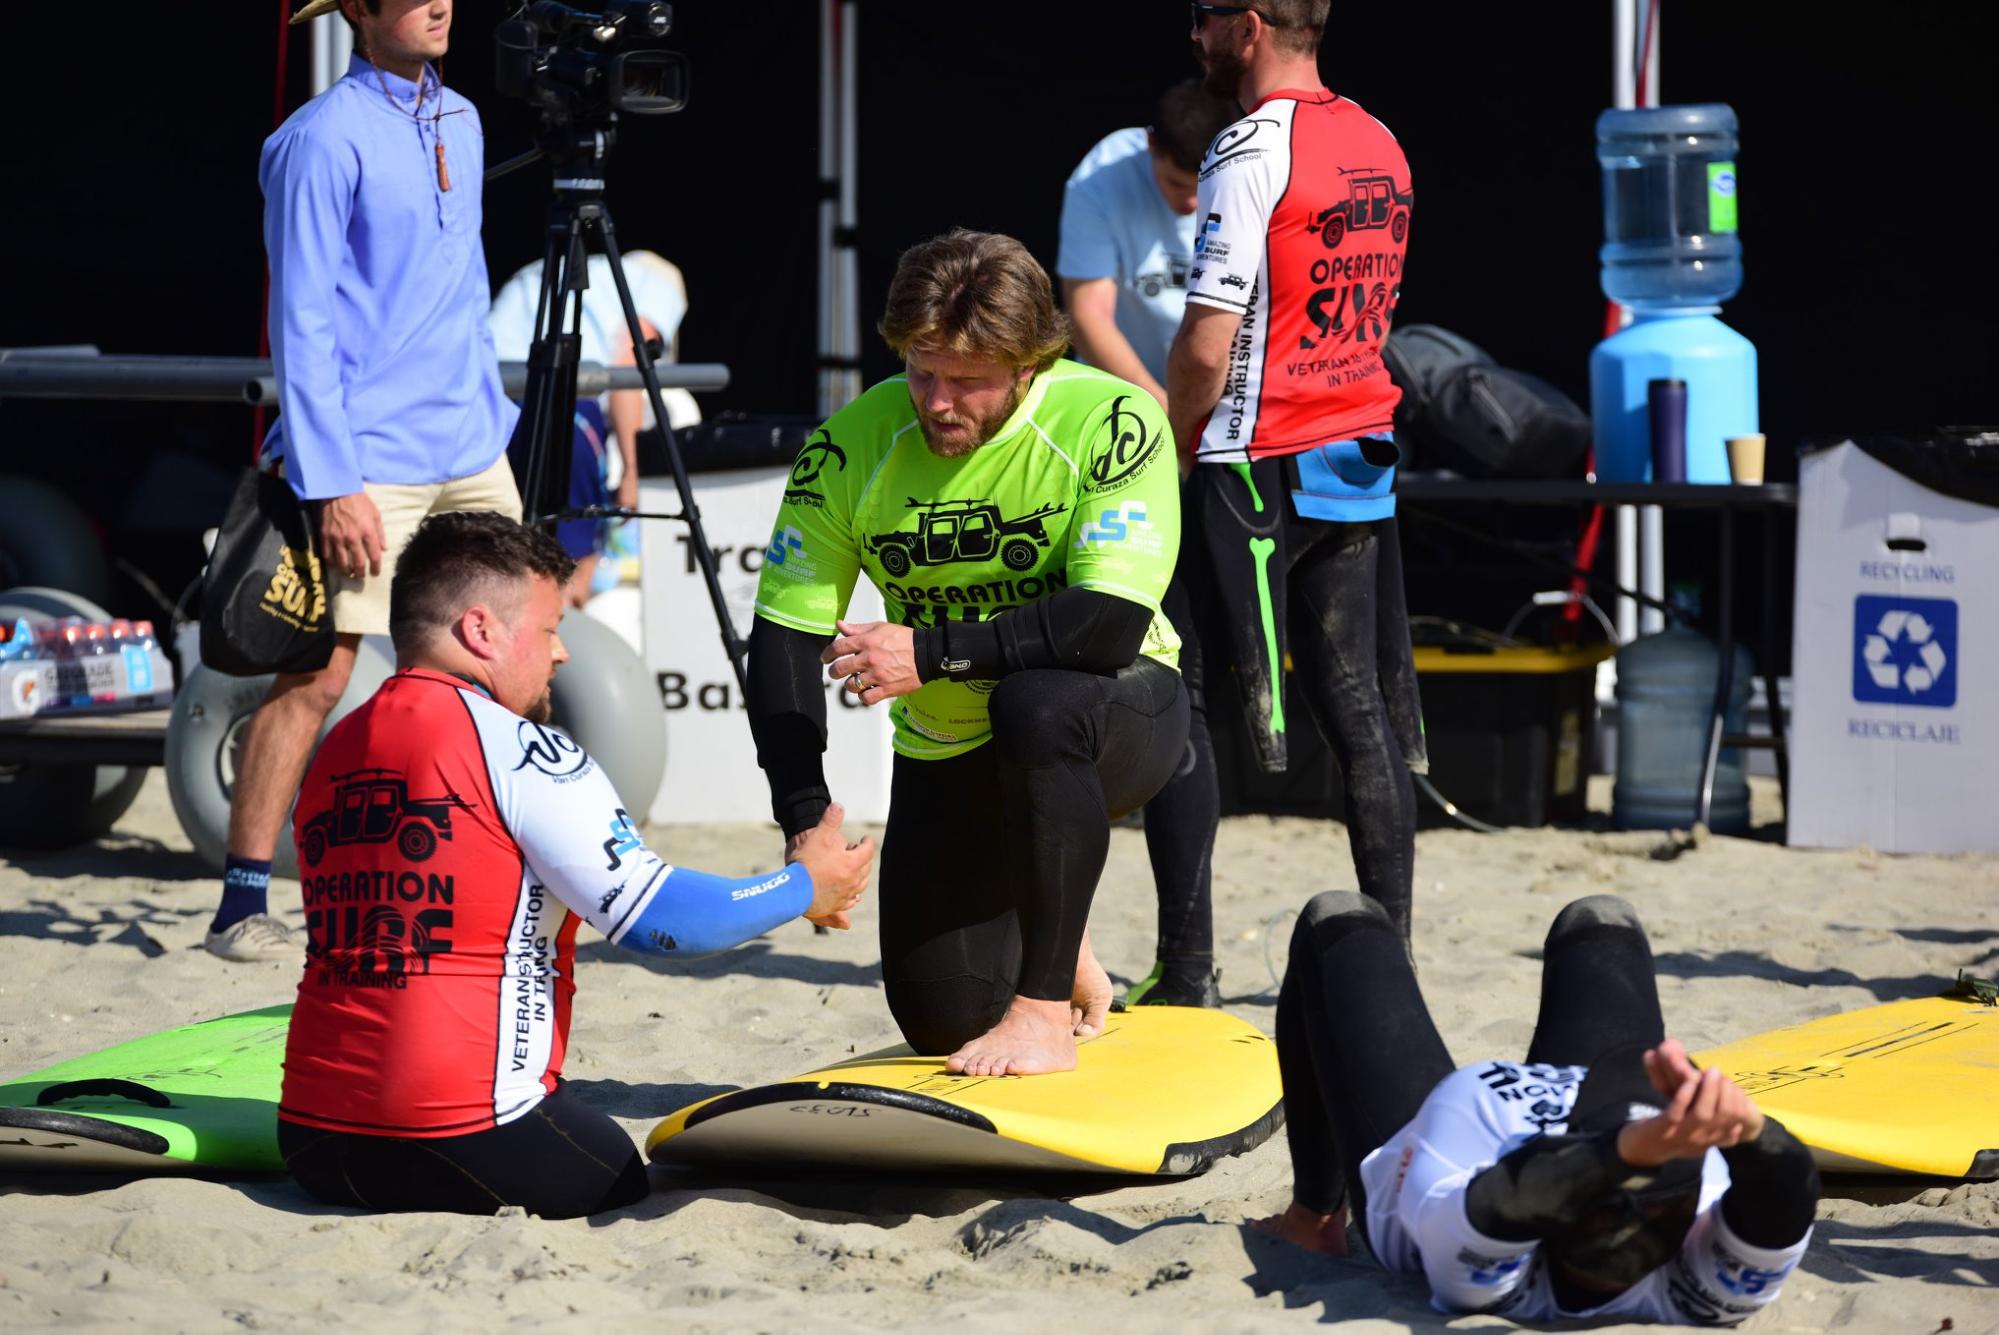 Support for Wounded Veterans through Operation Surf